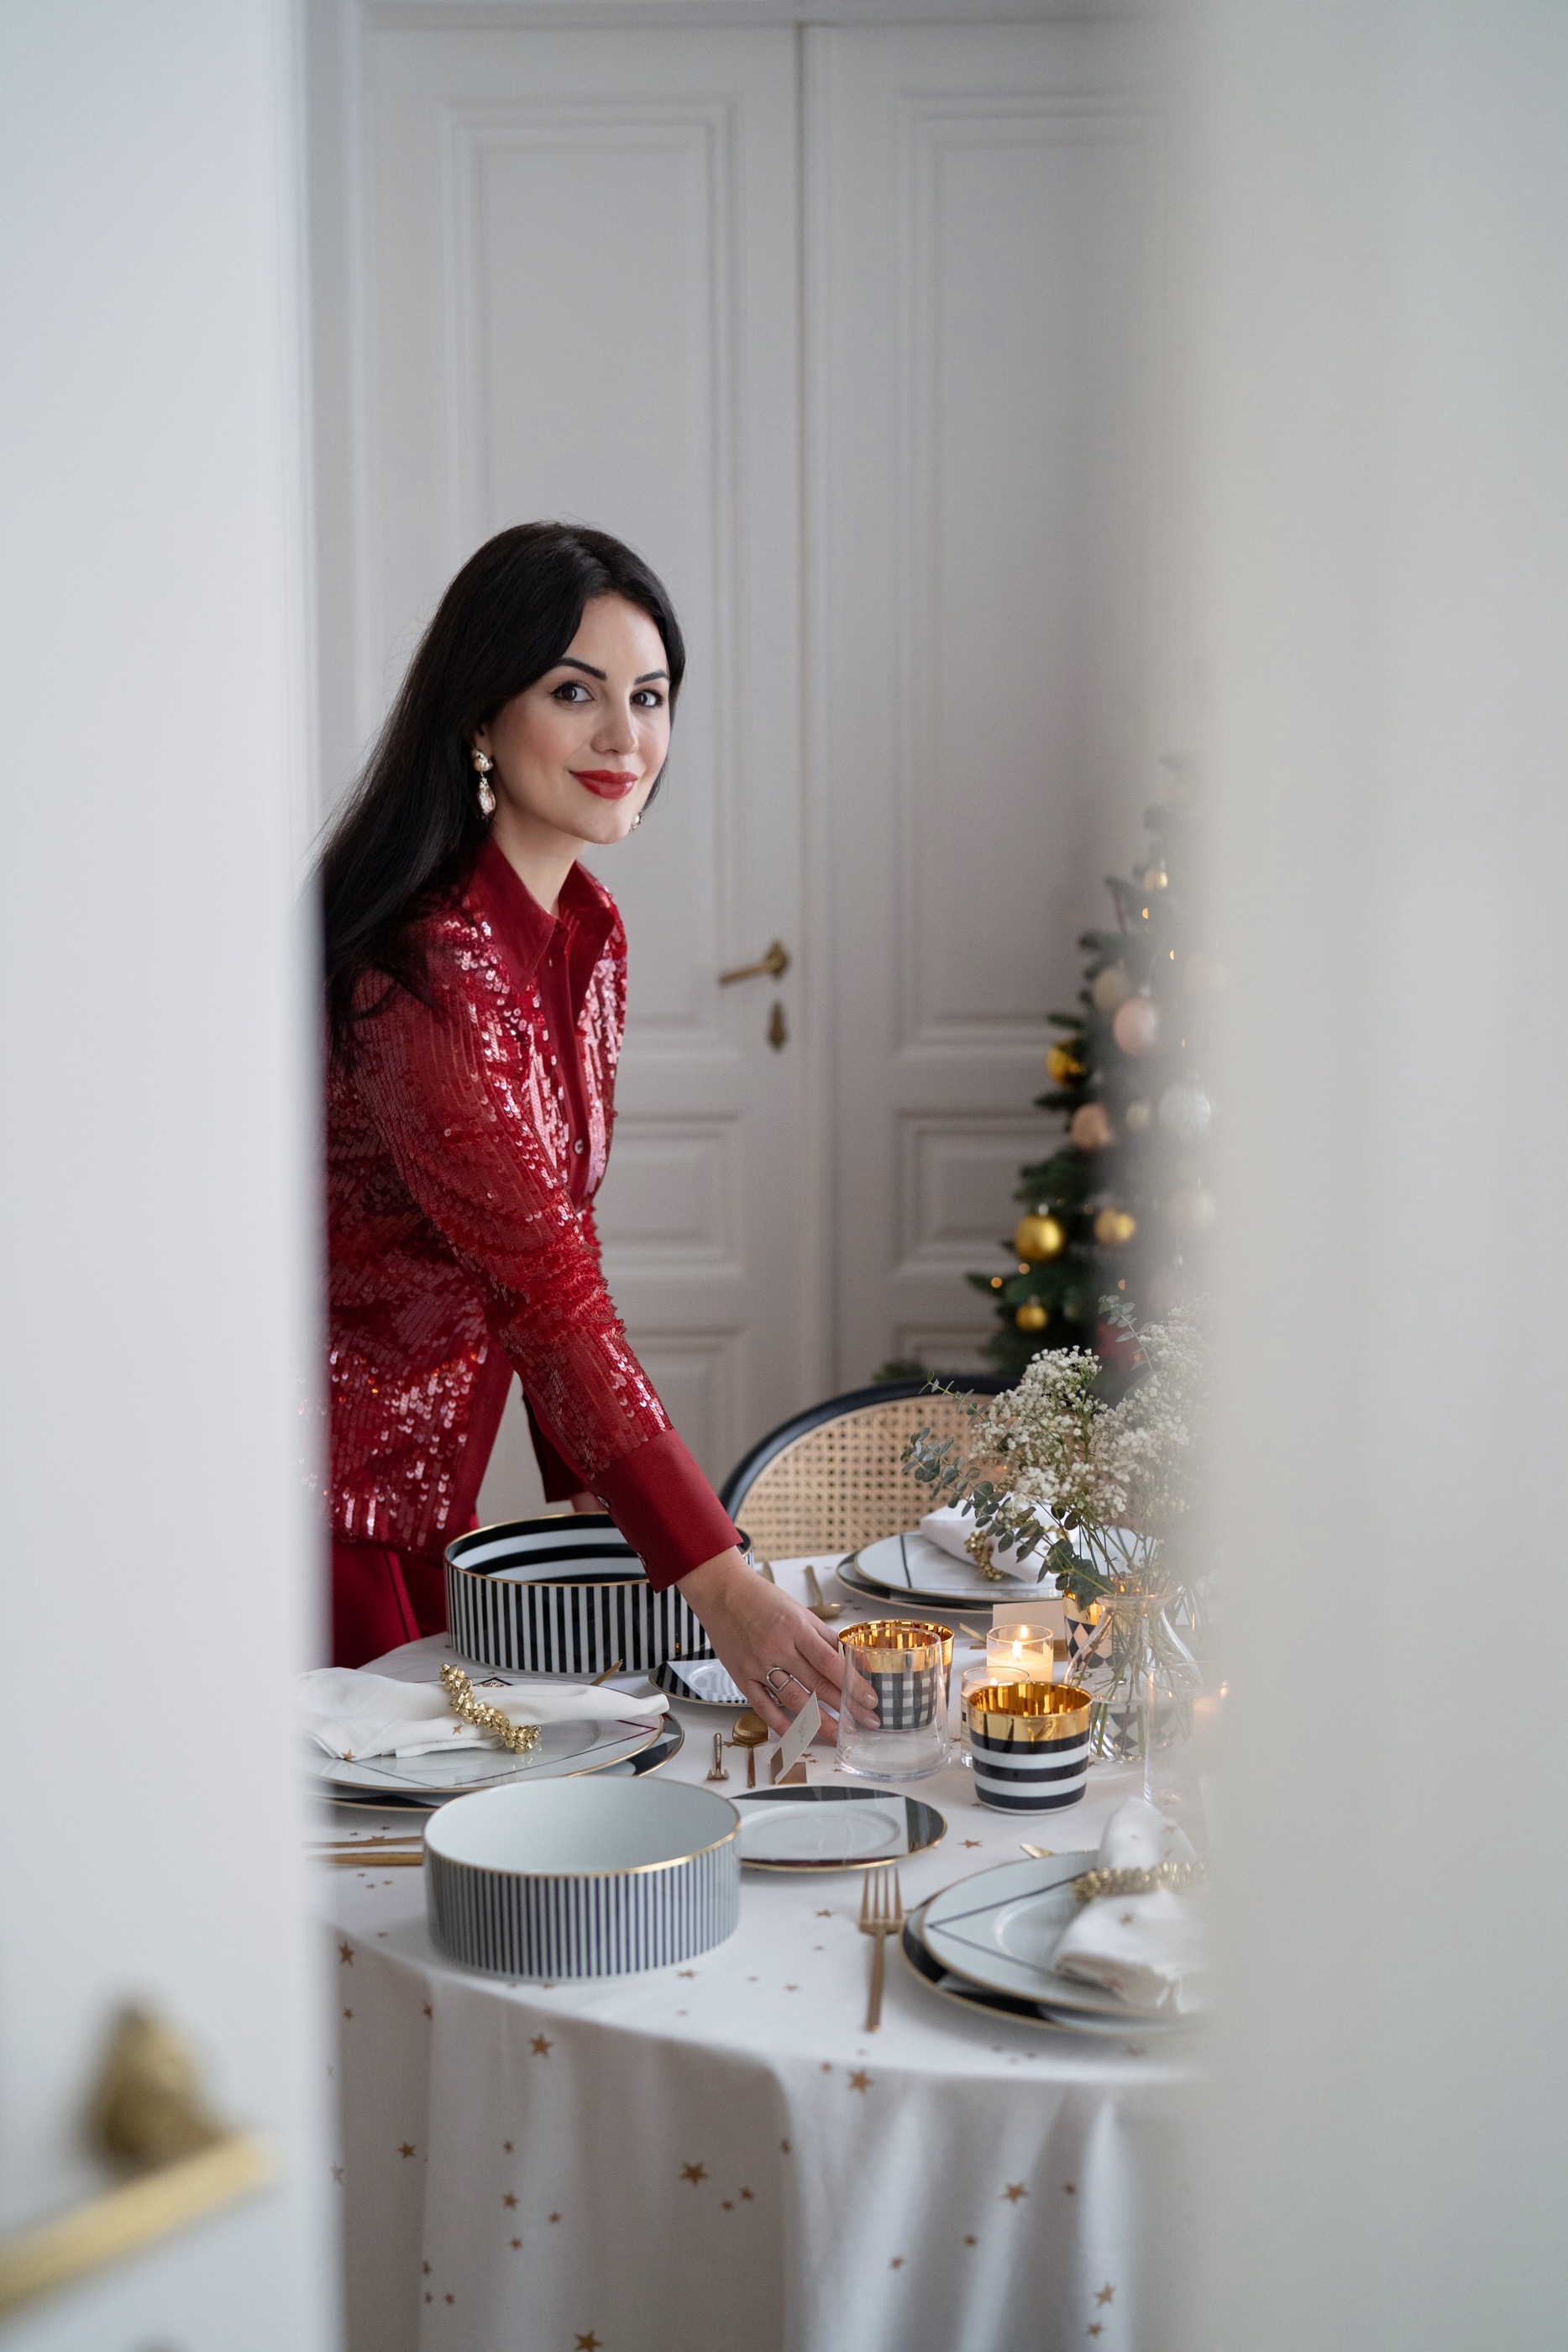 HOME EDIT: TIPS FOR A FESTIVE AND MODERN TABLESCAPE